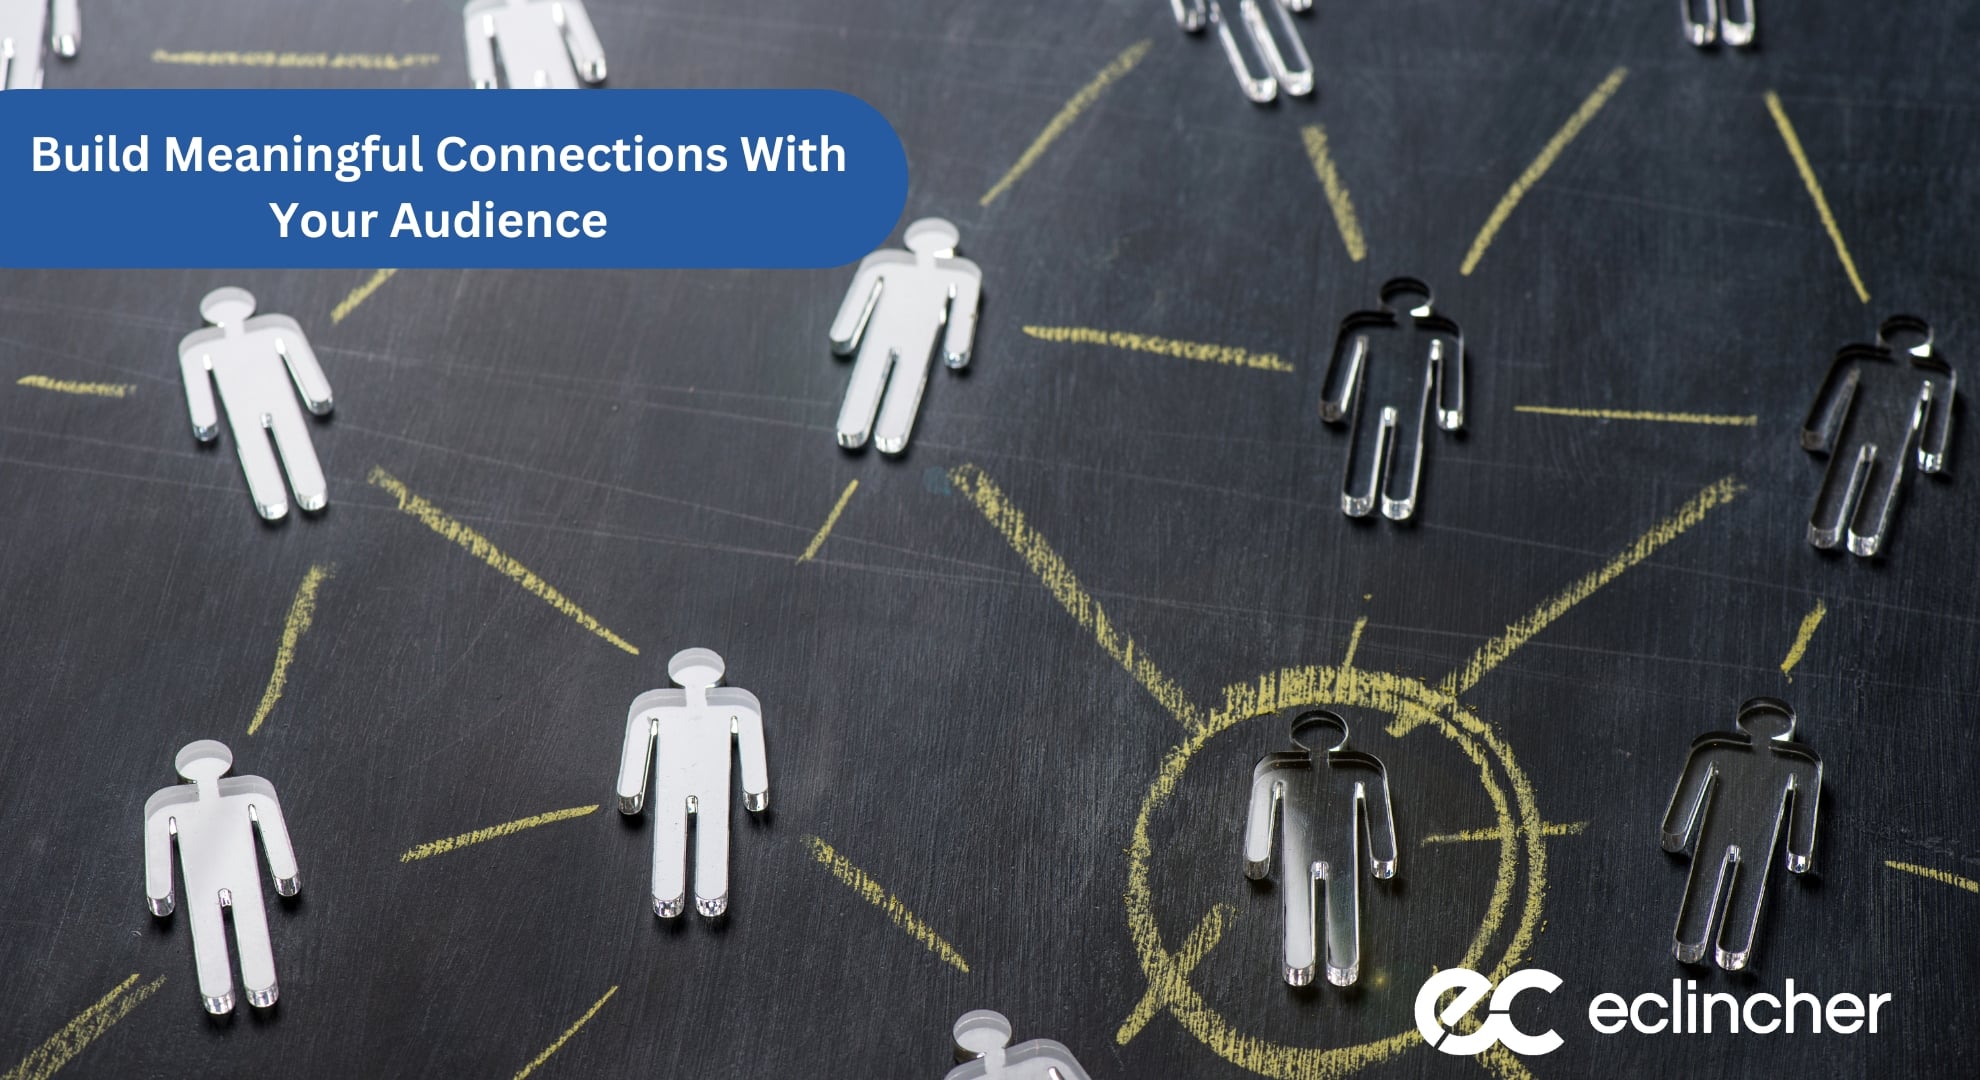 Build Meaningful Connections With Your Audience